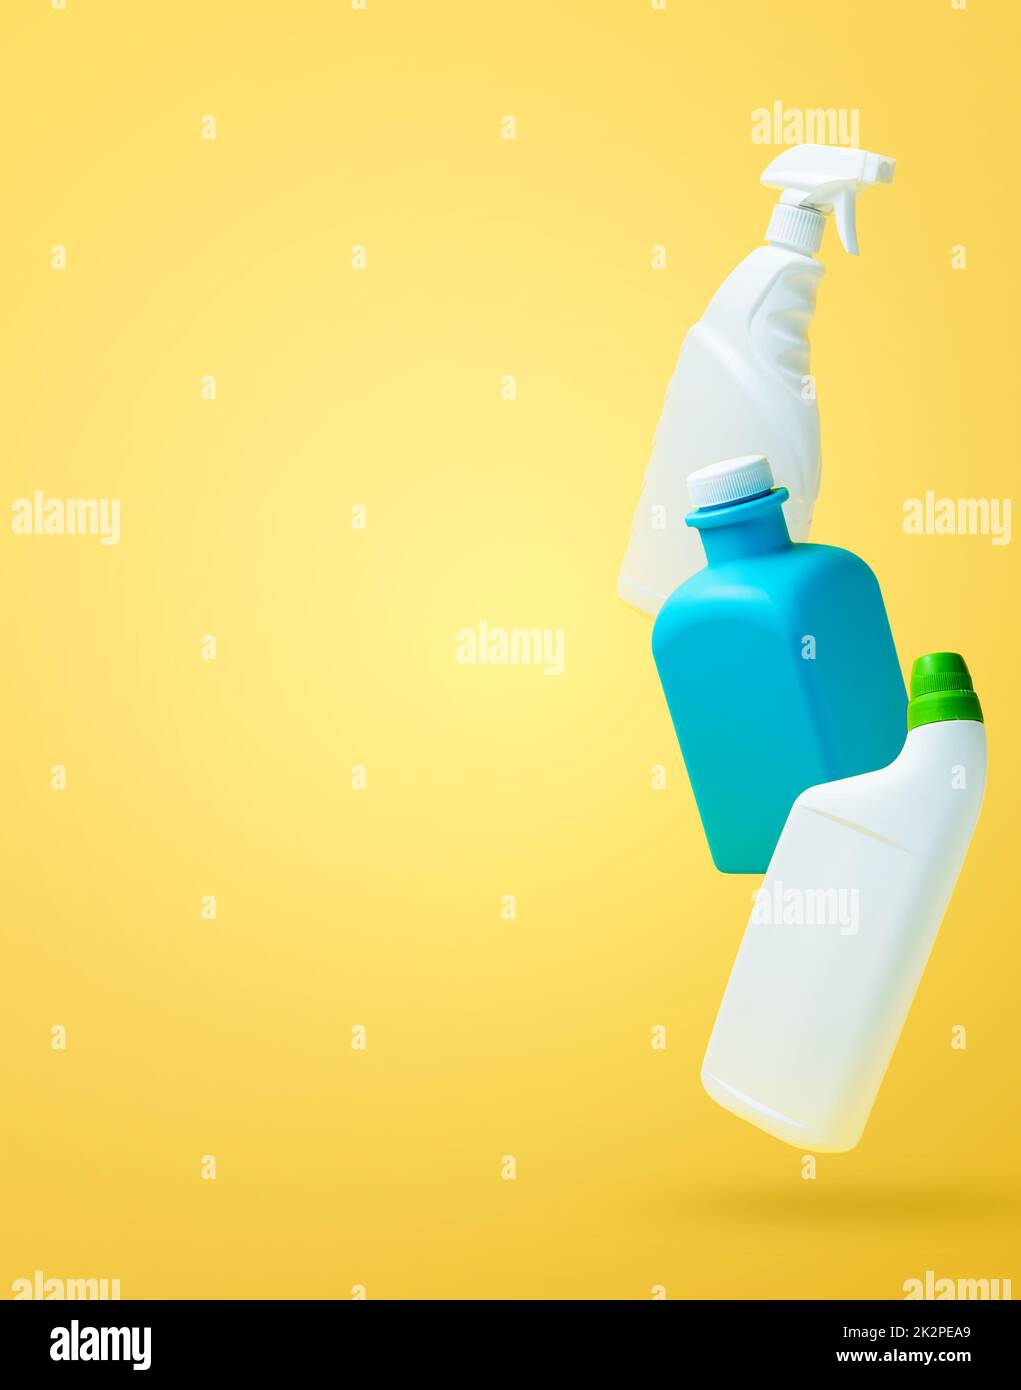 Falling in air blank household chemical bottles for cleaning the house Stock Photo